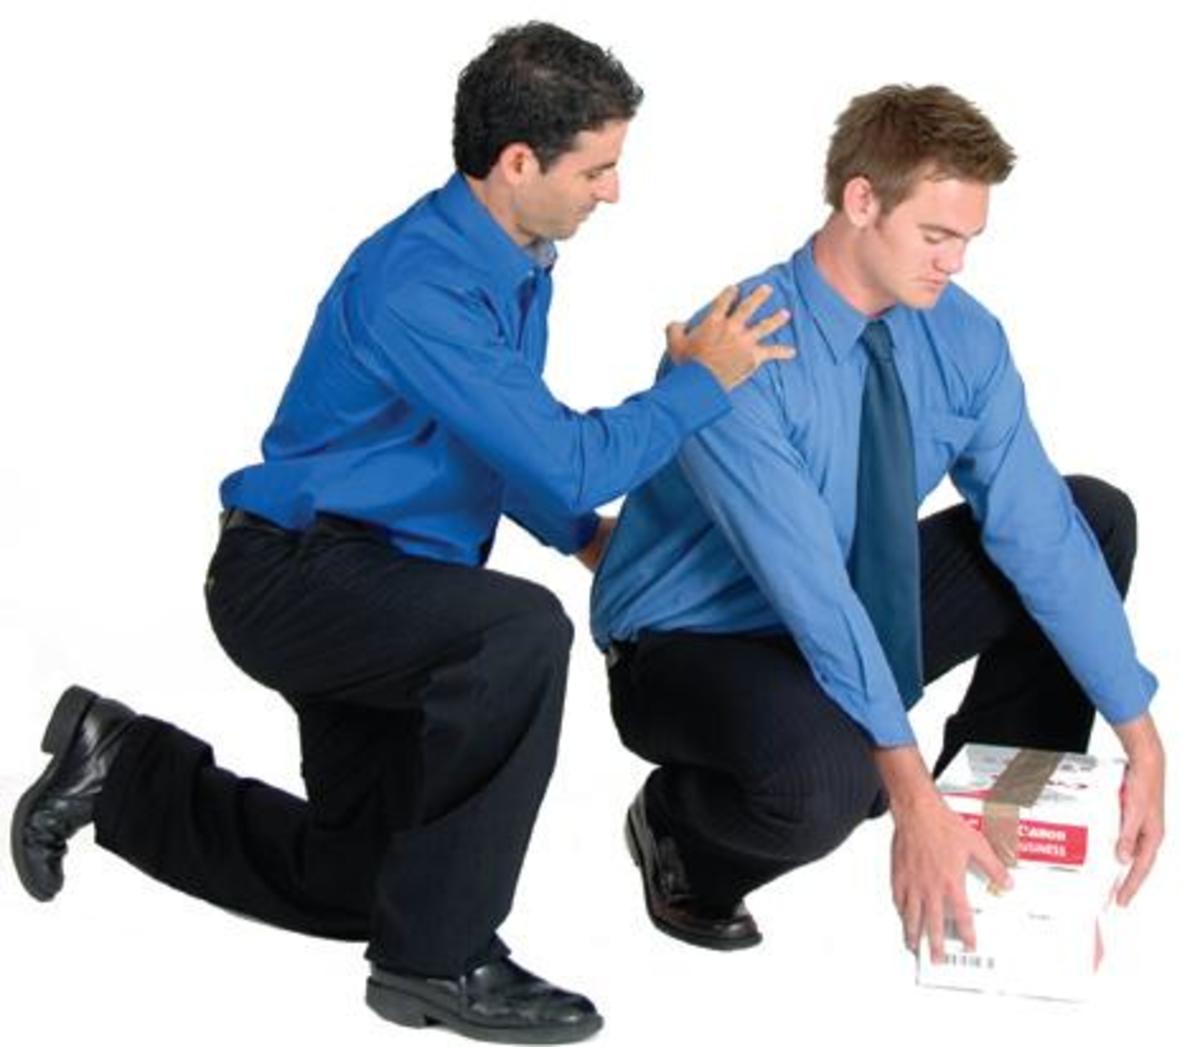 Most occupational injuries are a result of using poor ergonomics at work. You need a workstation modification.